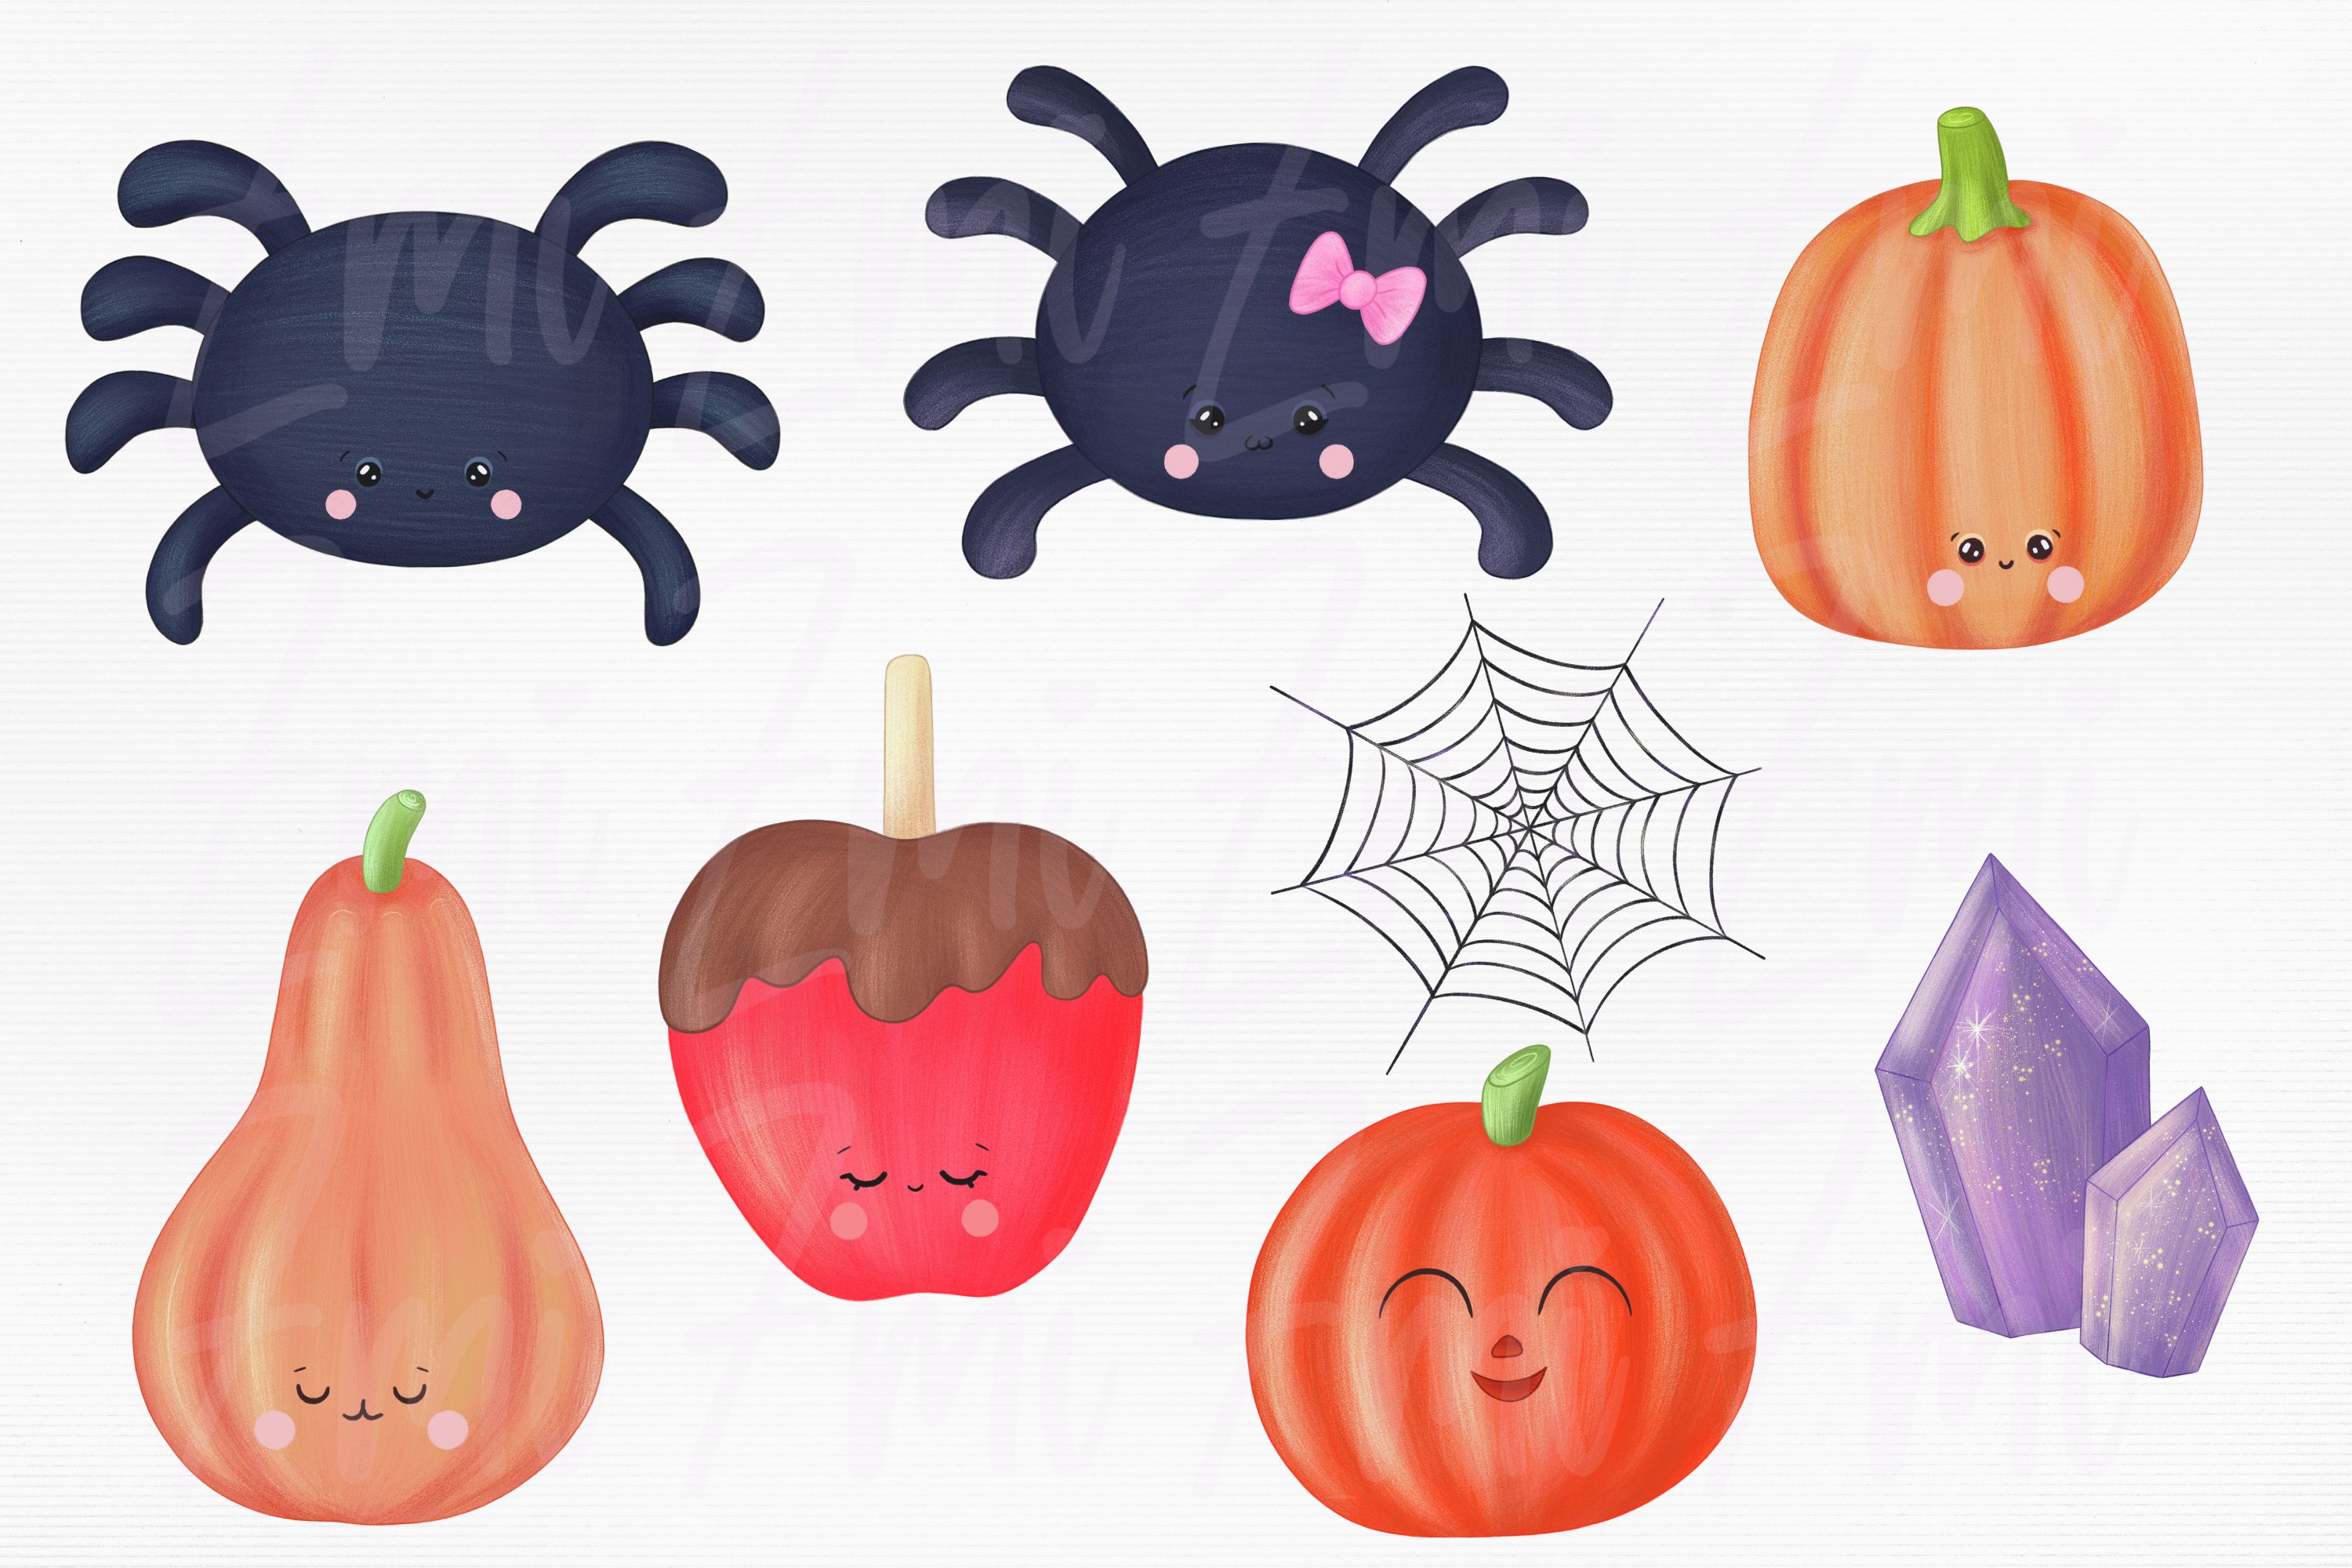 Clipart of 8 different halloween illustrations on a gray background.